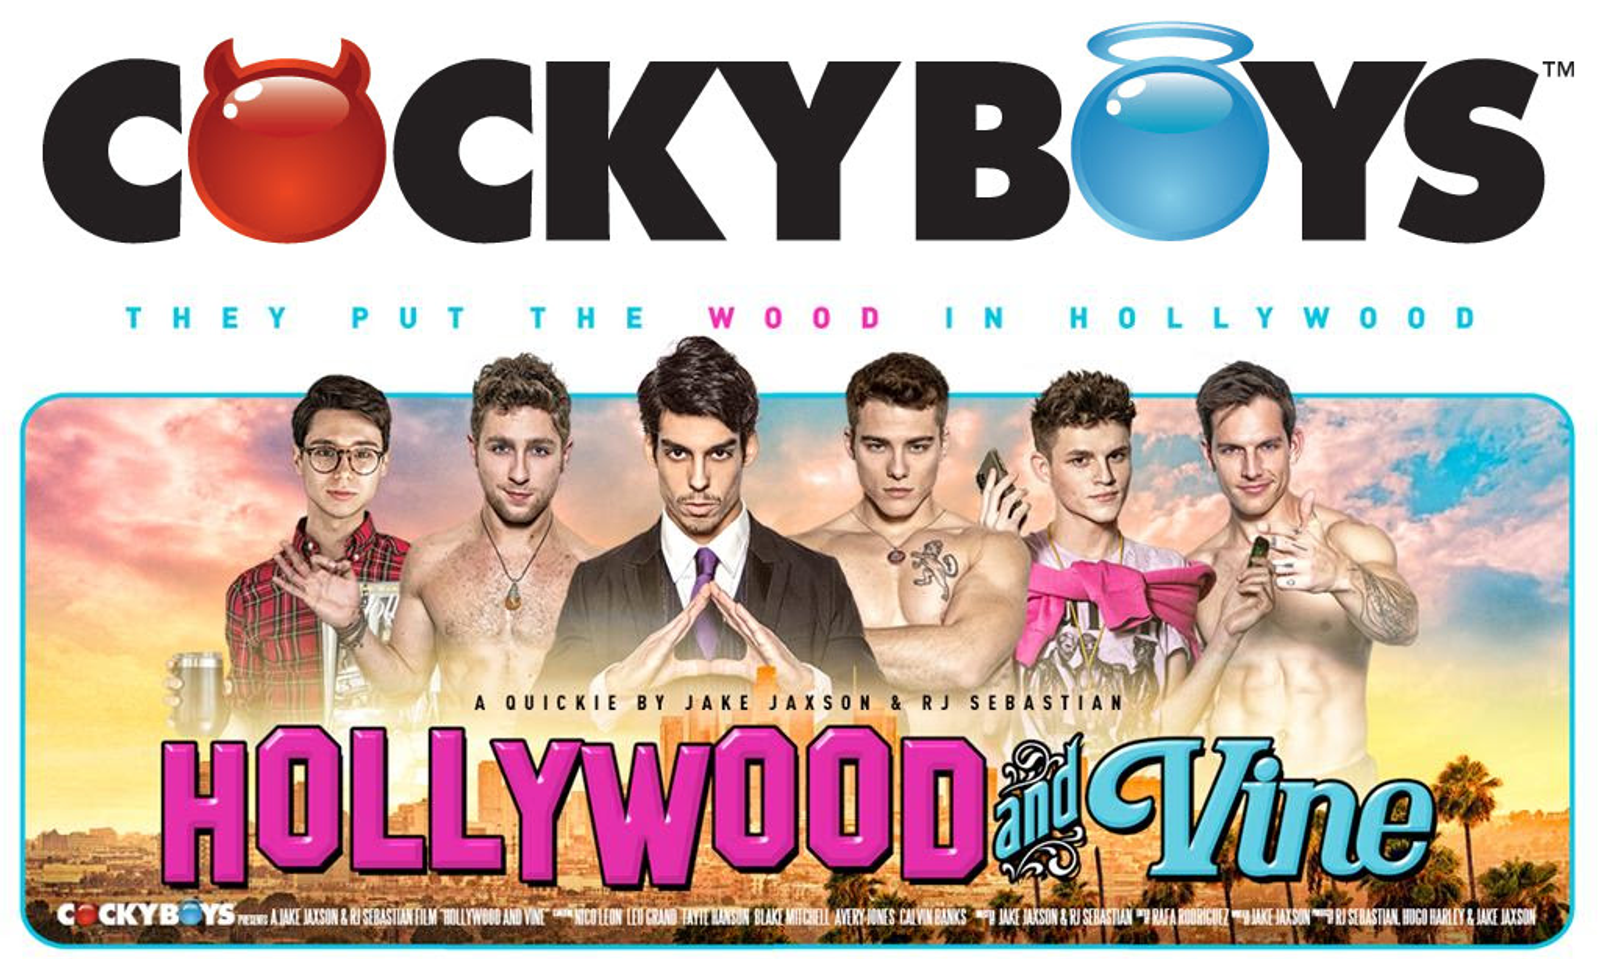 Cockyboys Drops Debut Episode Of New Feature 'Hollywood And Vine'